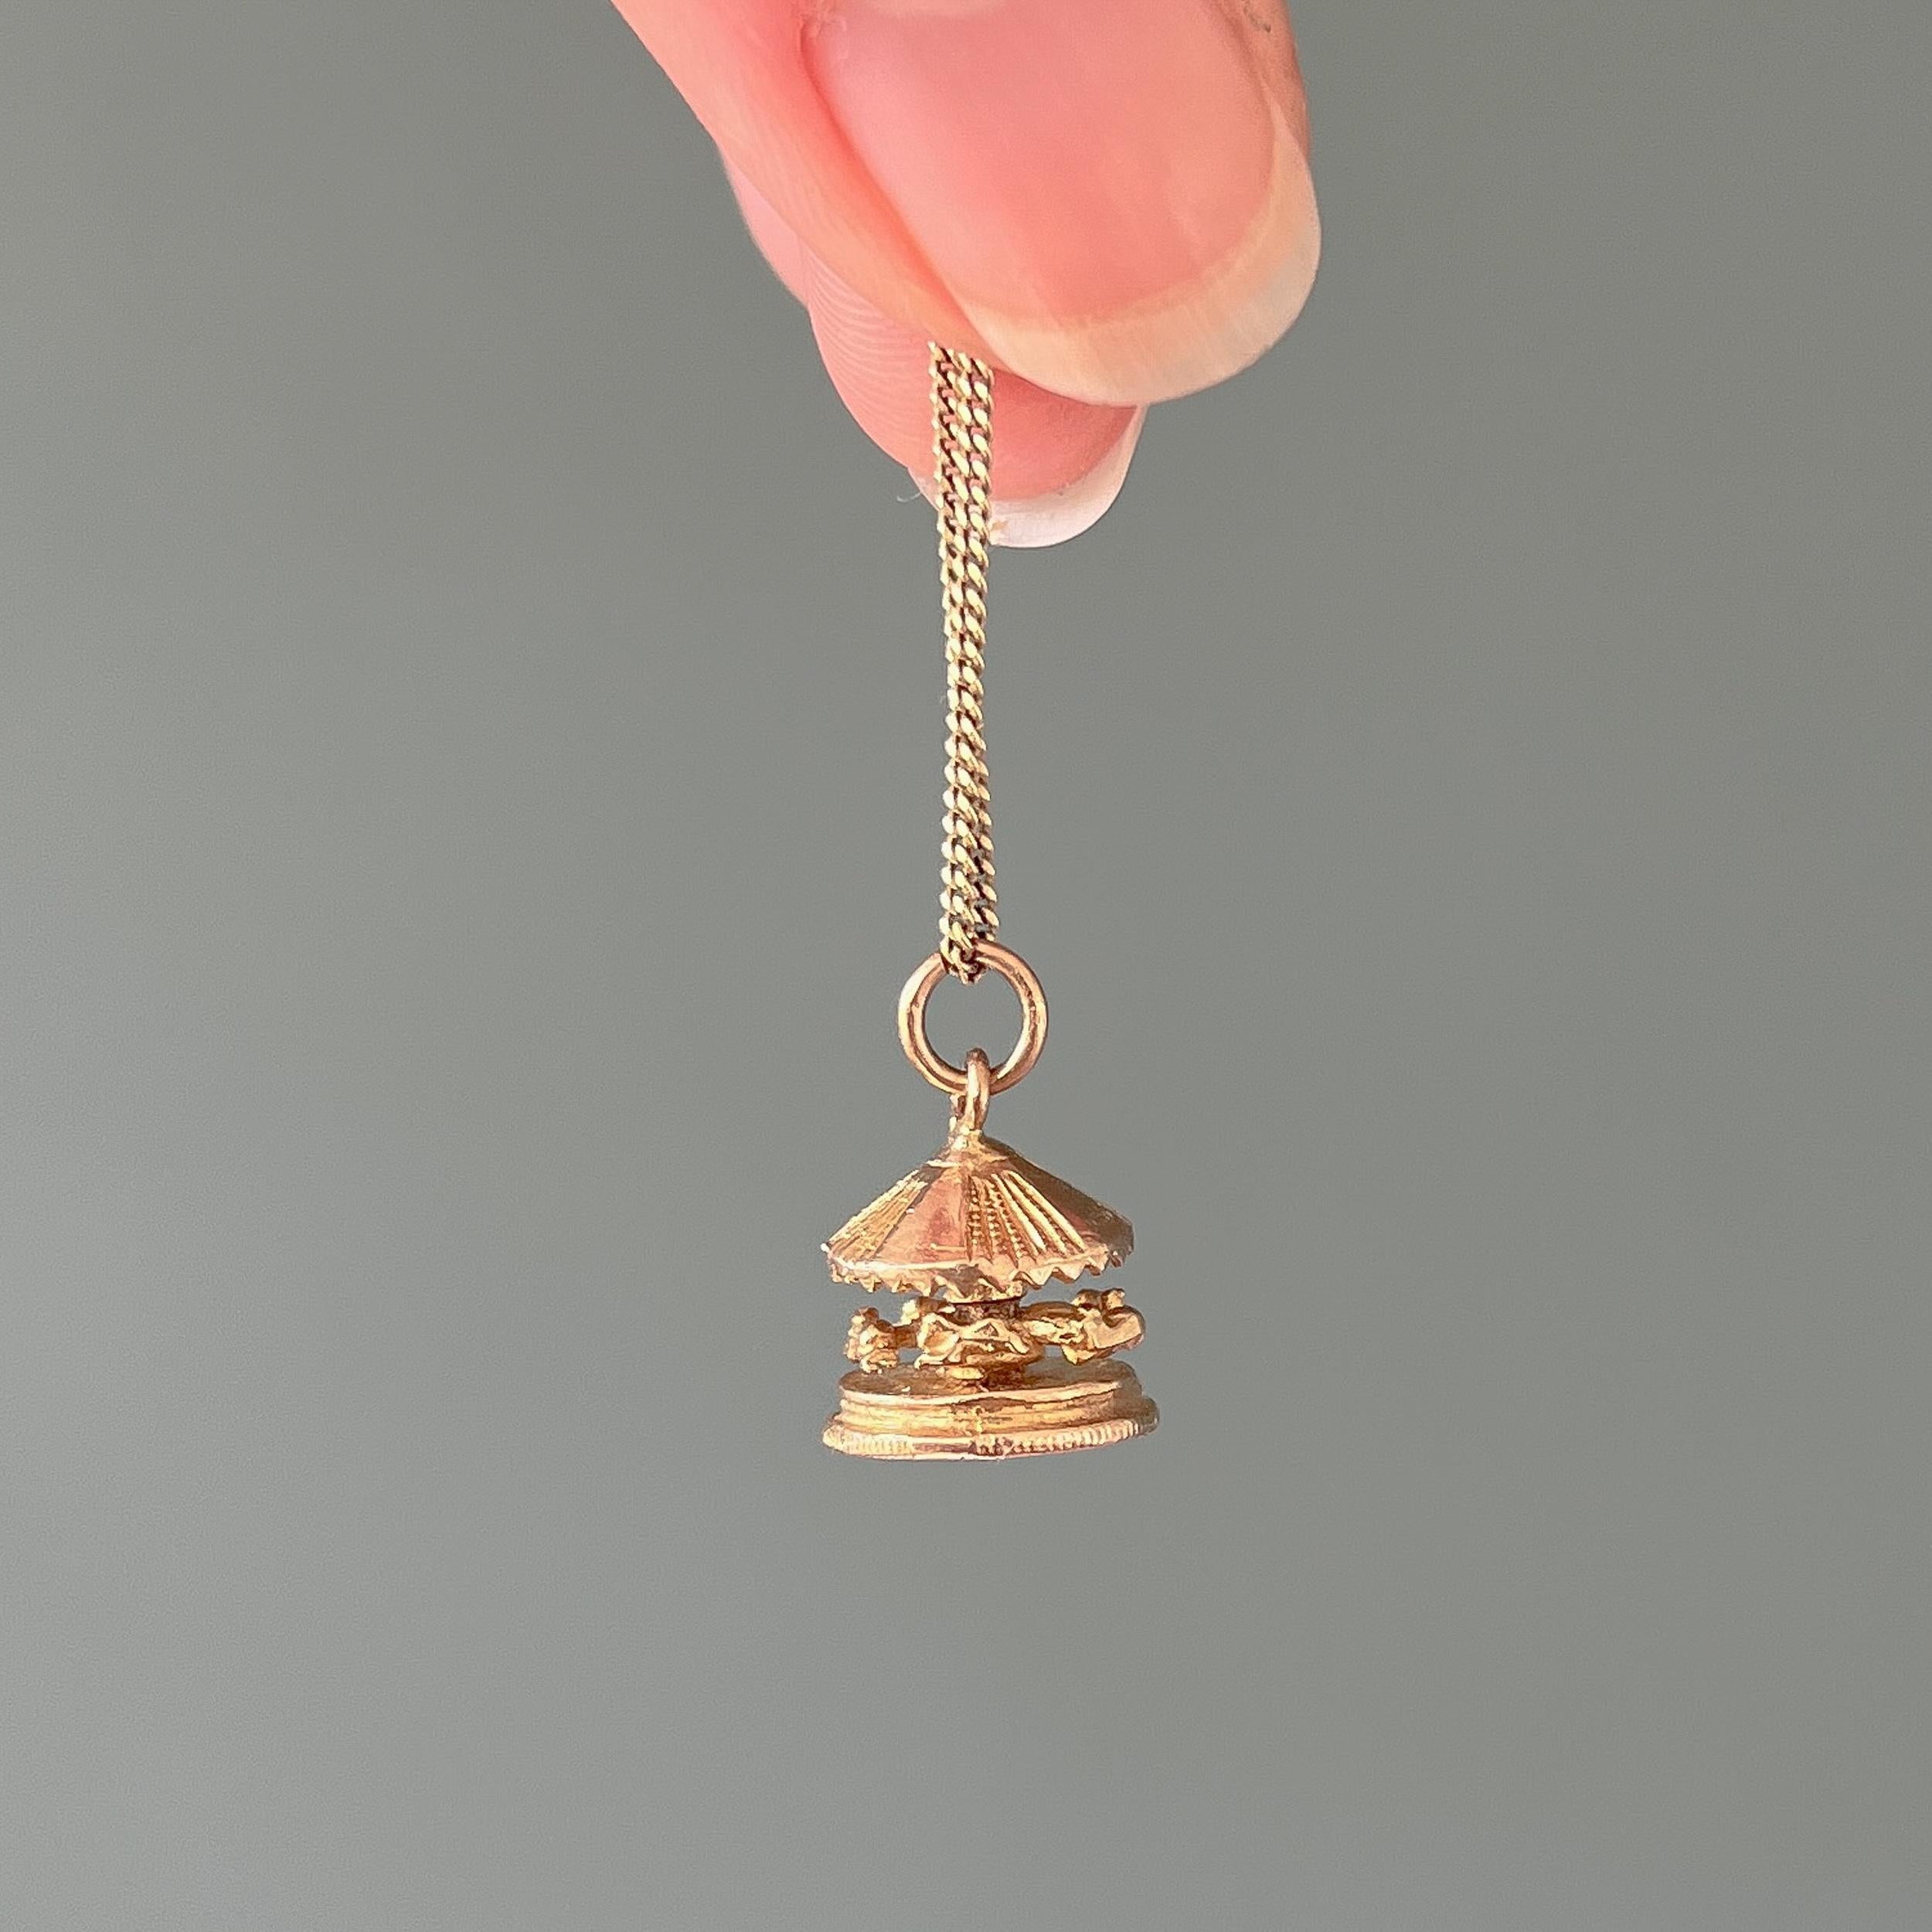 This is a vintage 9 karat yellow gold spinning horse carousel charm pendant. This vintage carousel is detailed with five horses that spin around the pole. The roof and floor of the carousel have some beautiful fluted carvings.

Collect your own